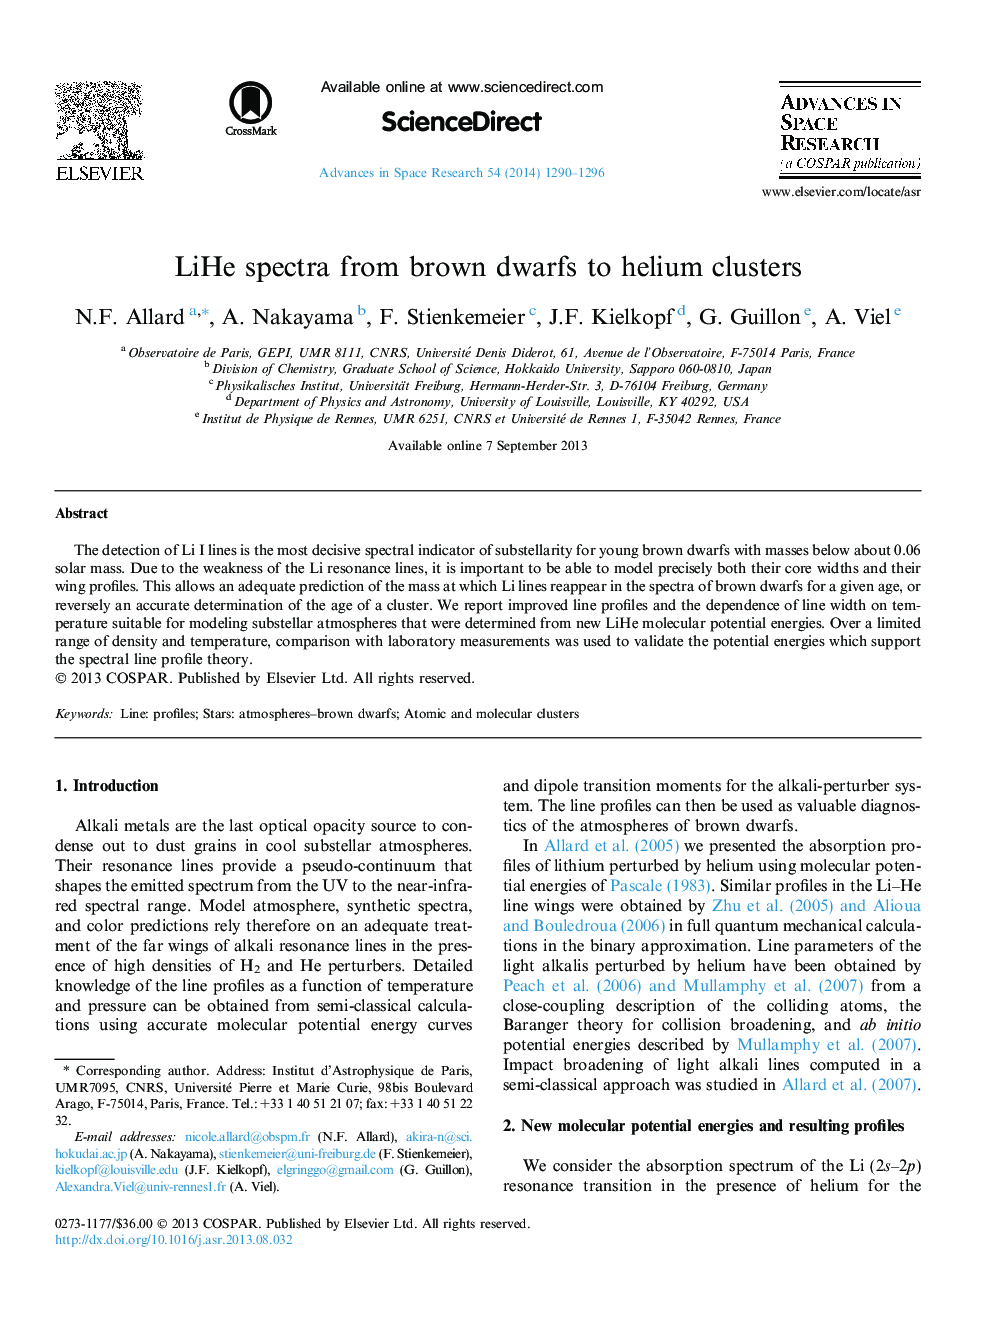 LiHe spectra from brown dwarfs to helium clusters